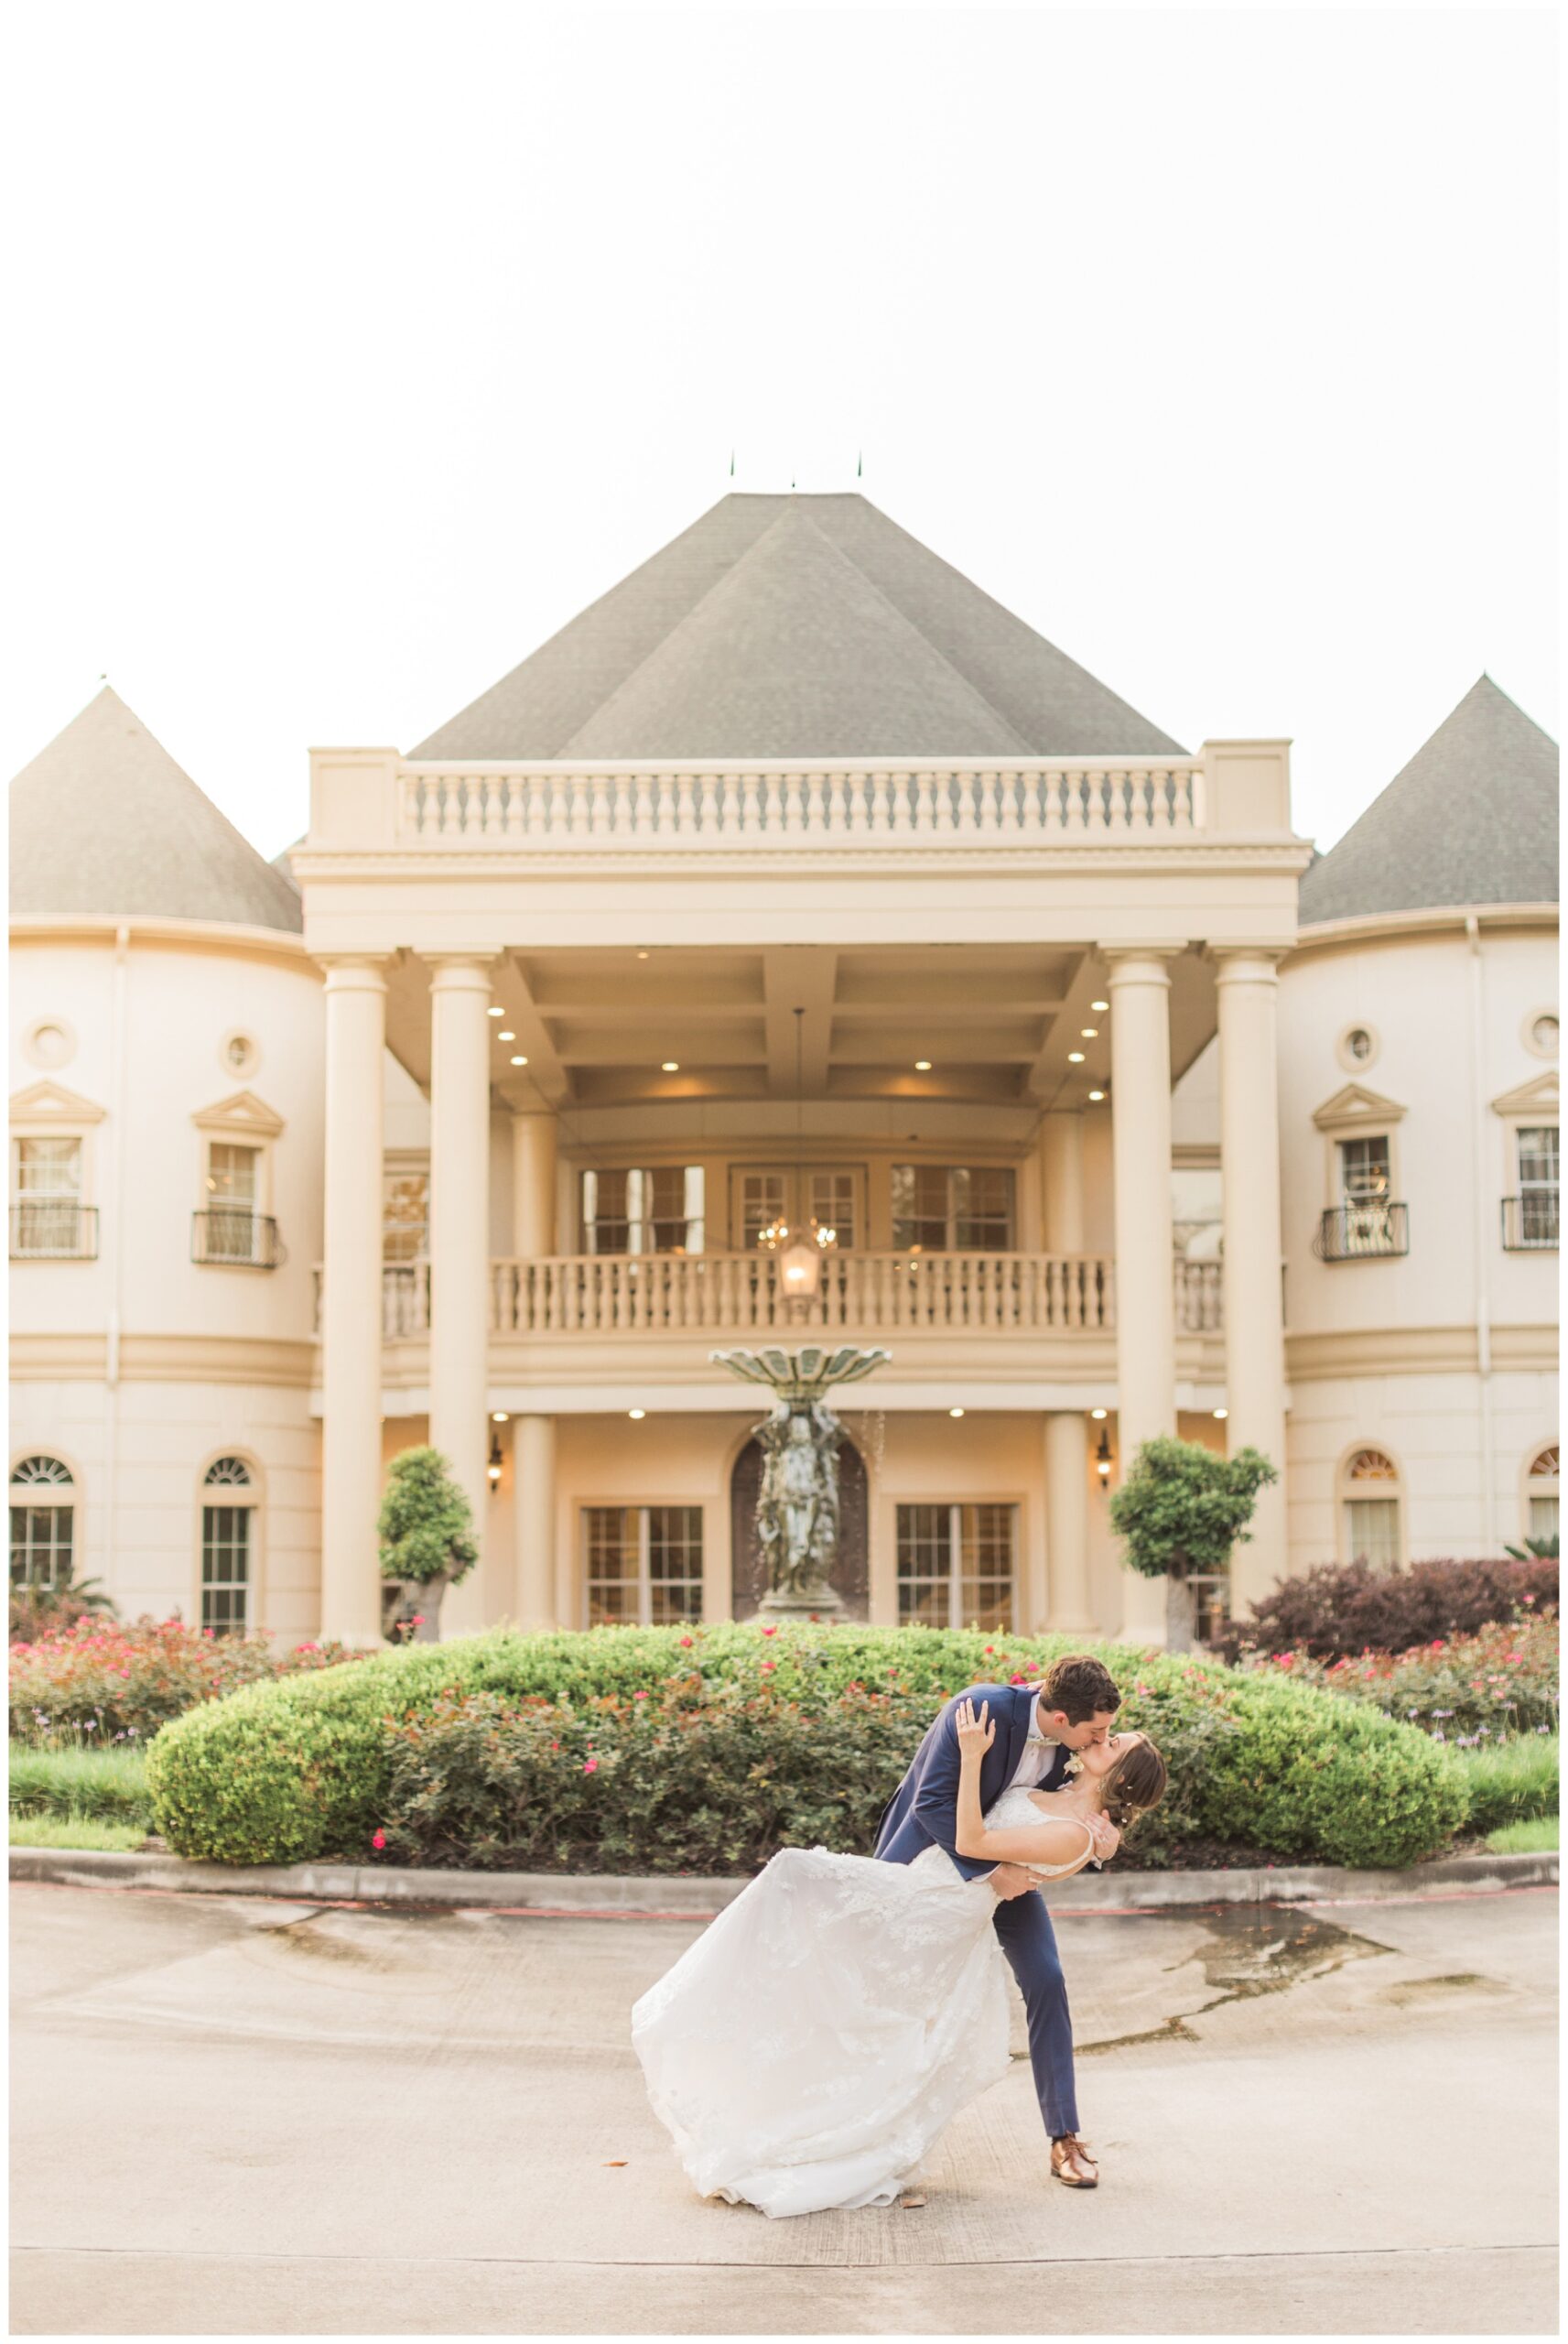 Sunset bridal portraits at The Springs in Cypress